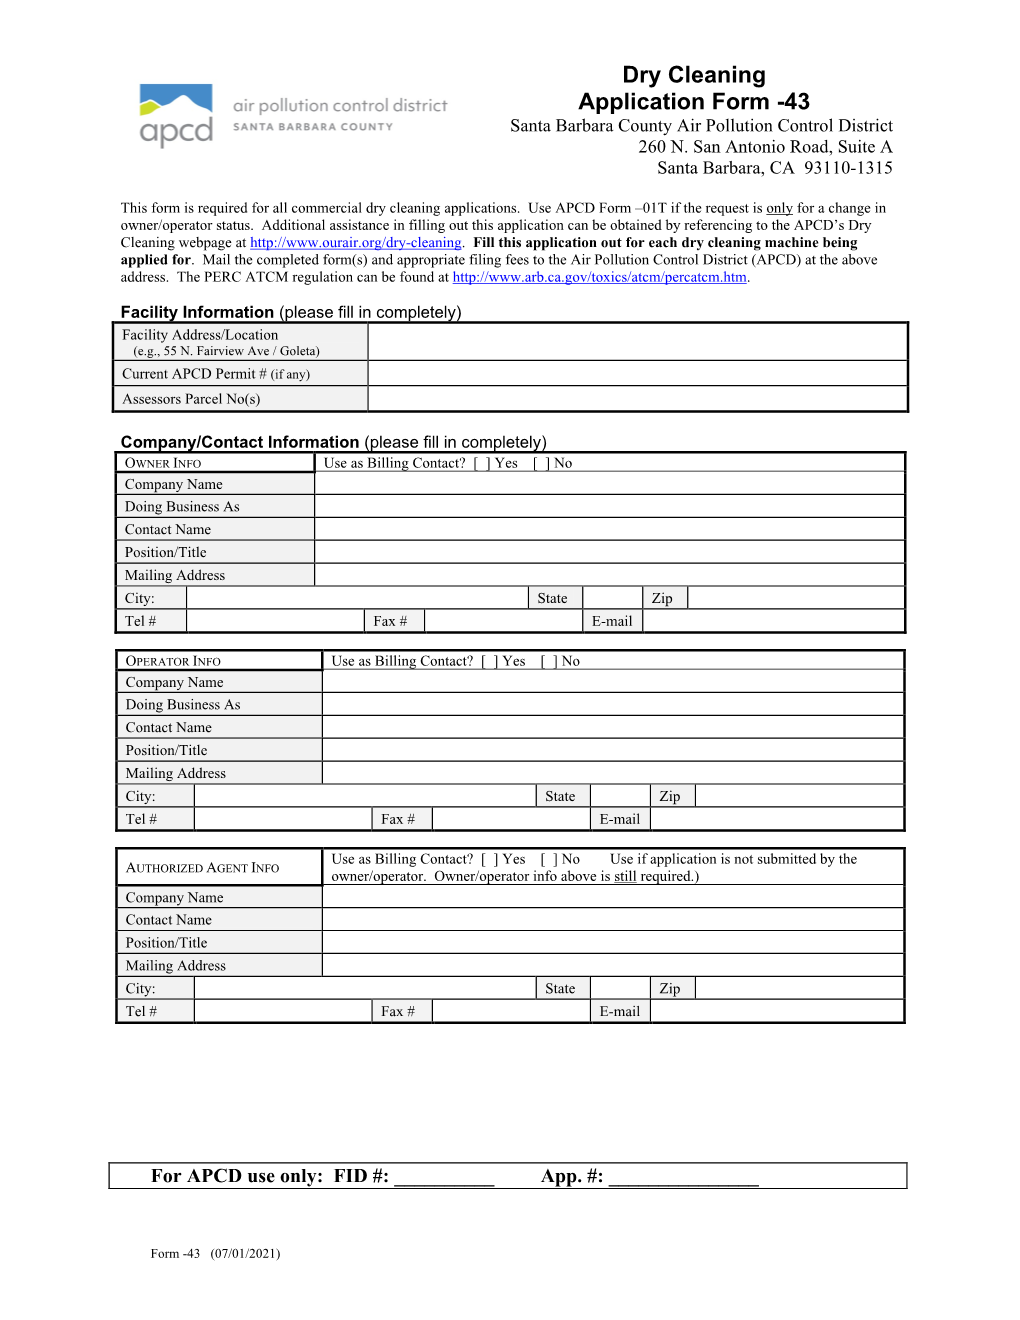 Dry Cleaning Application Form -43 Santa Barbara County Air Pollution Control District 260 N